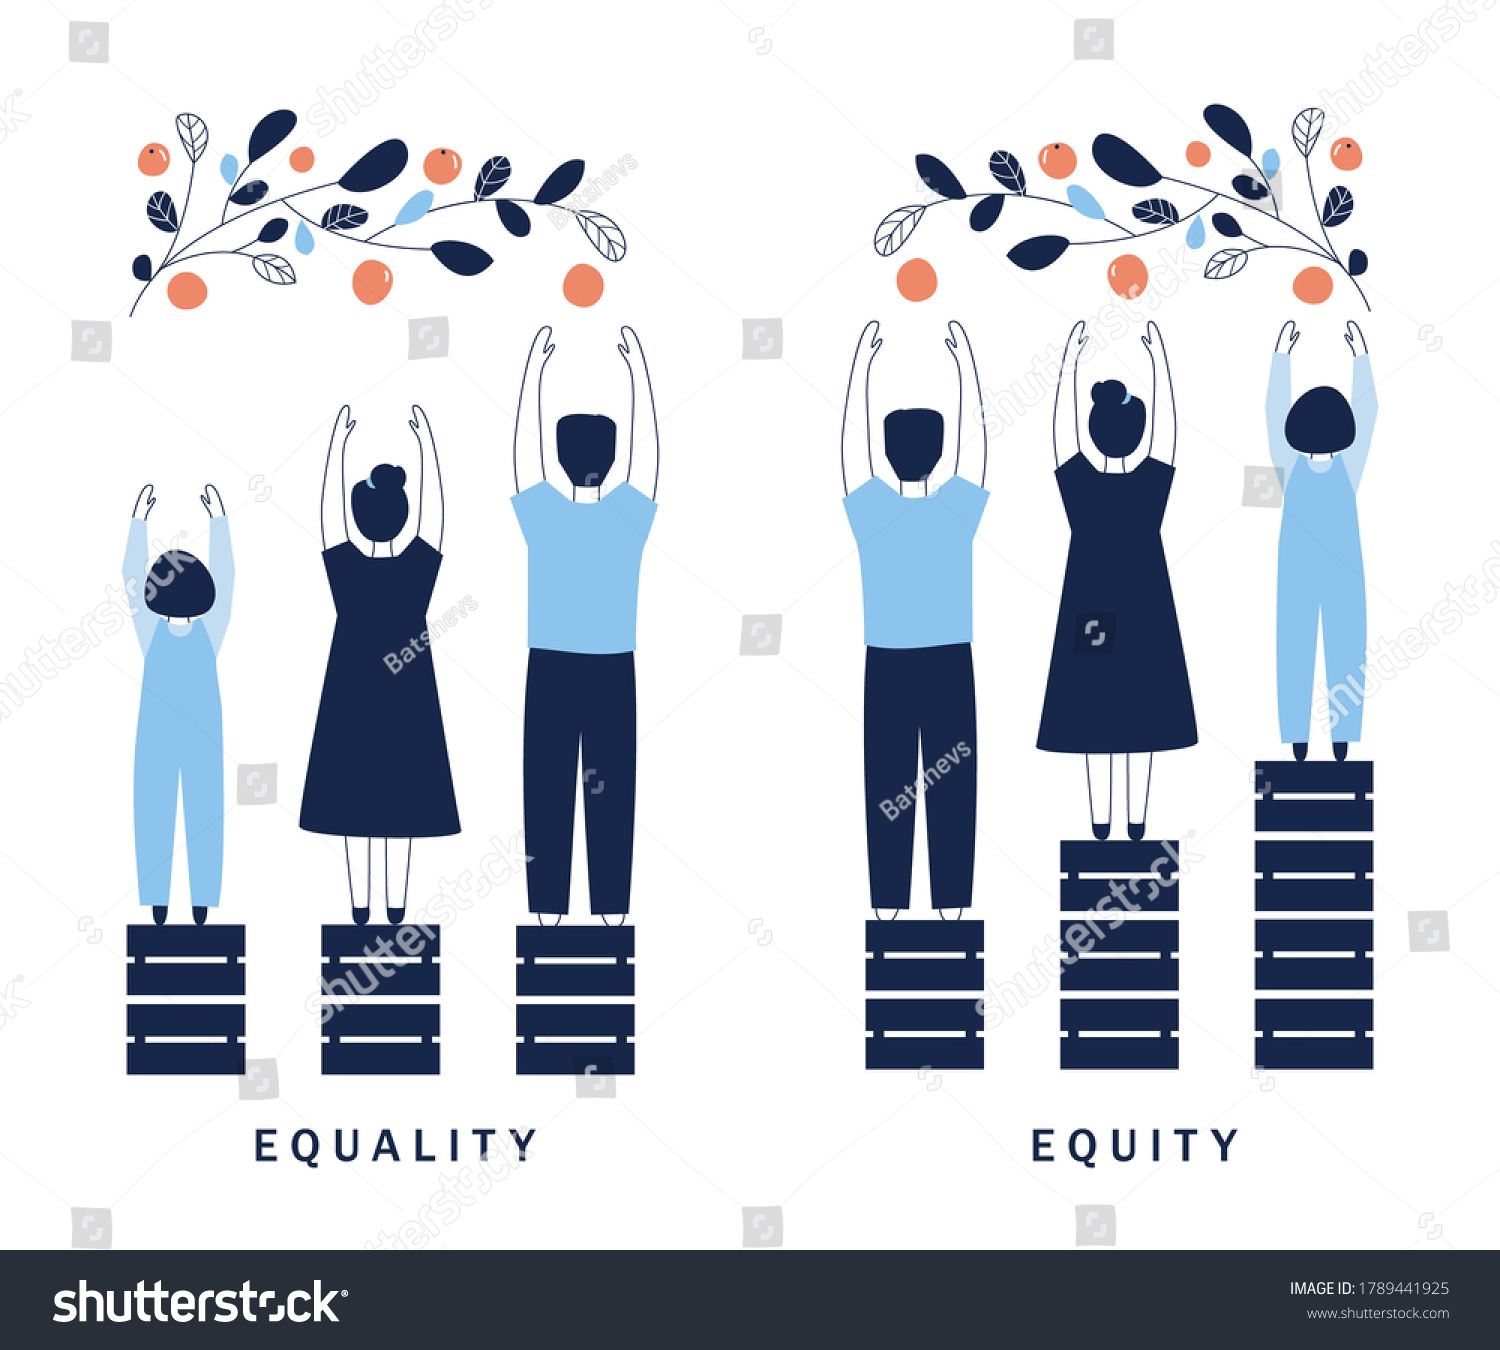 Equality Equity Concept Illustration Human Rights Stock Vector Royalty Free Shutterstock